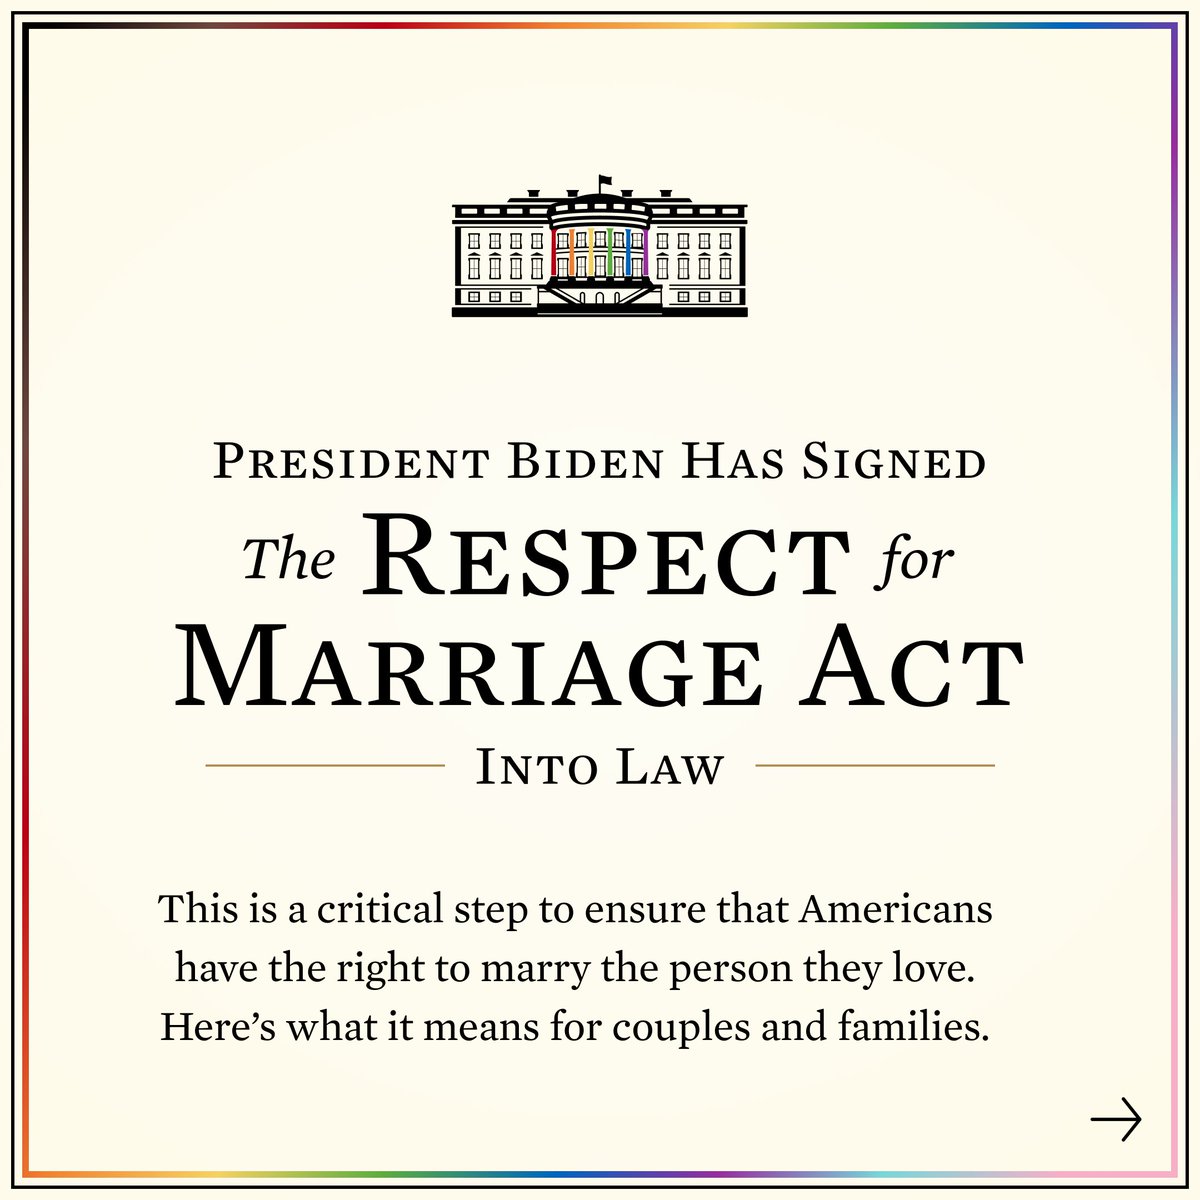 Ten years ago, President Biden announced his support for marriage equality – becoming the highest-ranking U.S. government official to do so. Today, @POTUS signed historic legislation to protect marriage for same-sex and interracial couples.